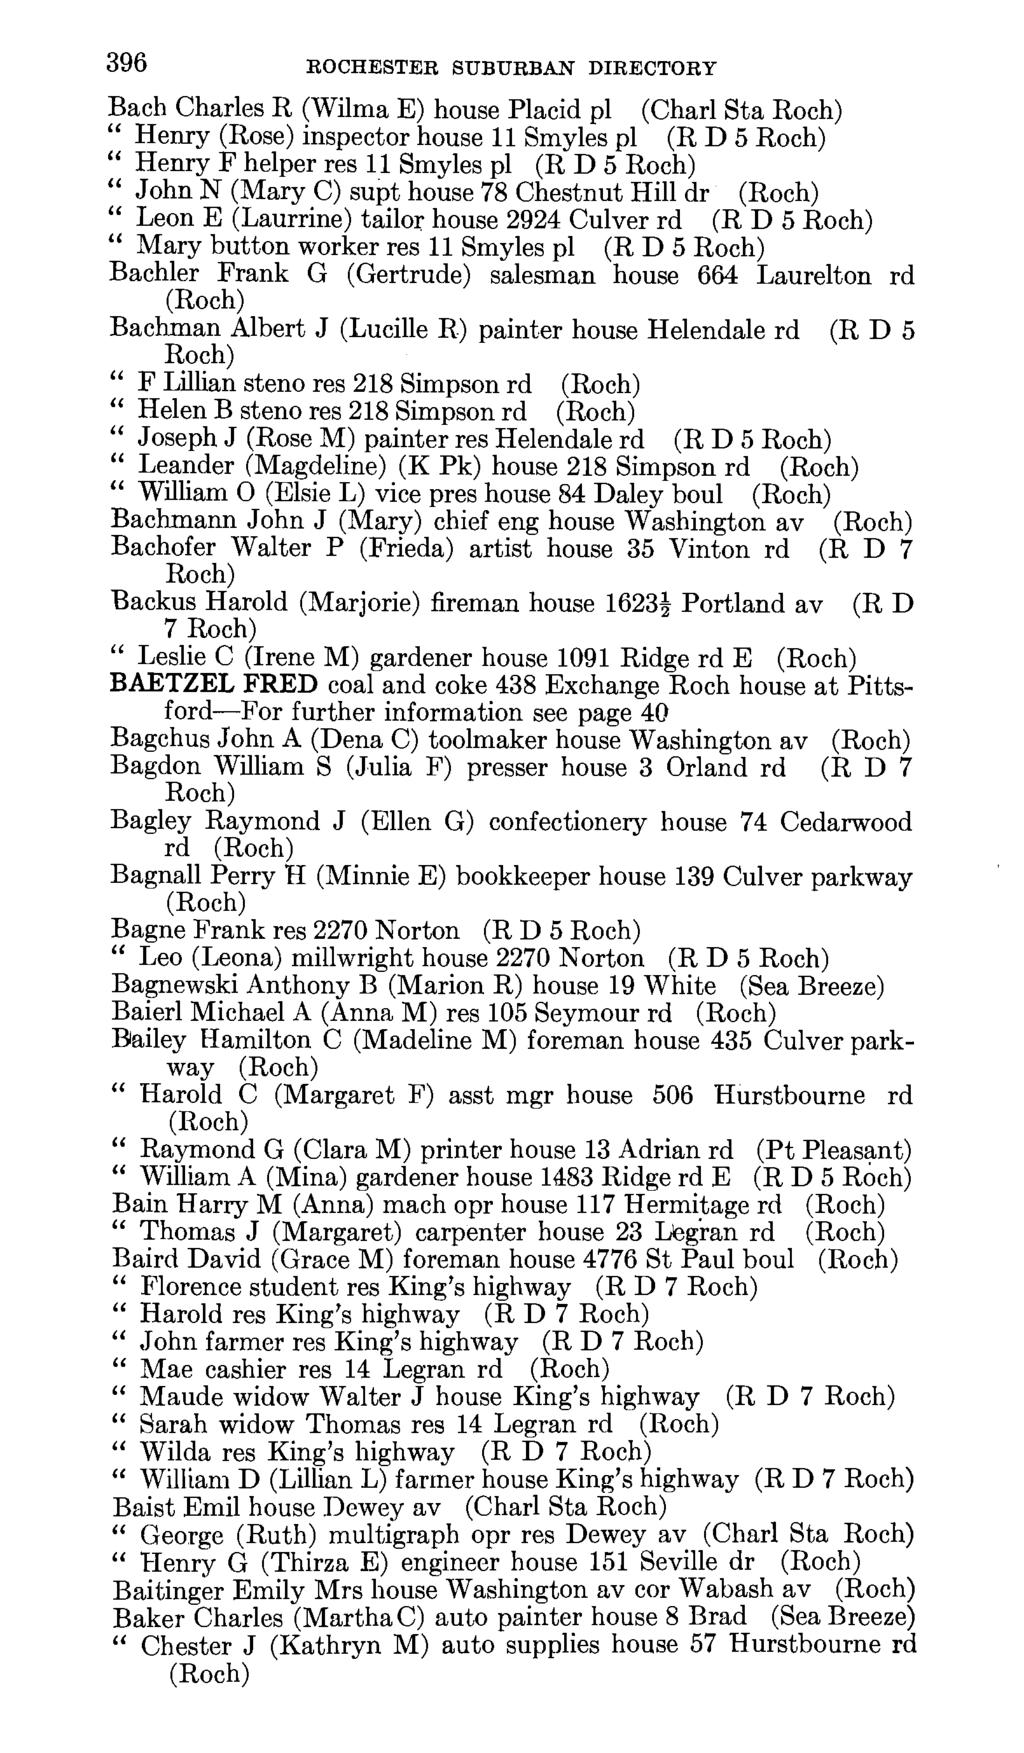 396 ROCHESTER SUBURBAN DIRECTORY Bach Charles R (Wilma E) house Placid pi (Charl Sta Henry (Rose) inspector house 11 Smyles pi (R D 5 Henry F helper res 11 Smyles pi (R D 5 John N (Mary C) supt house